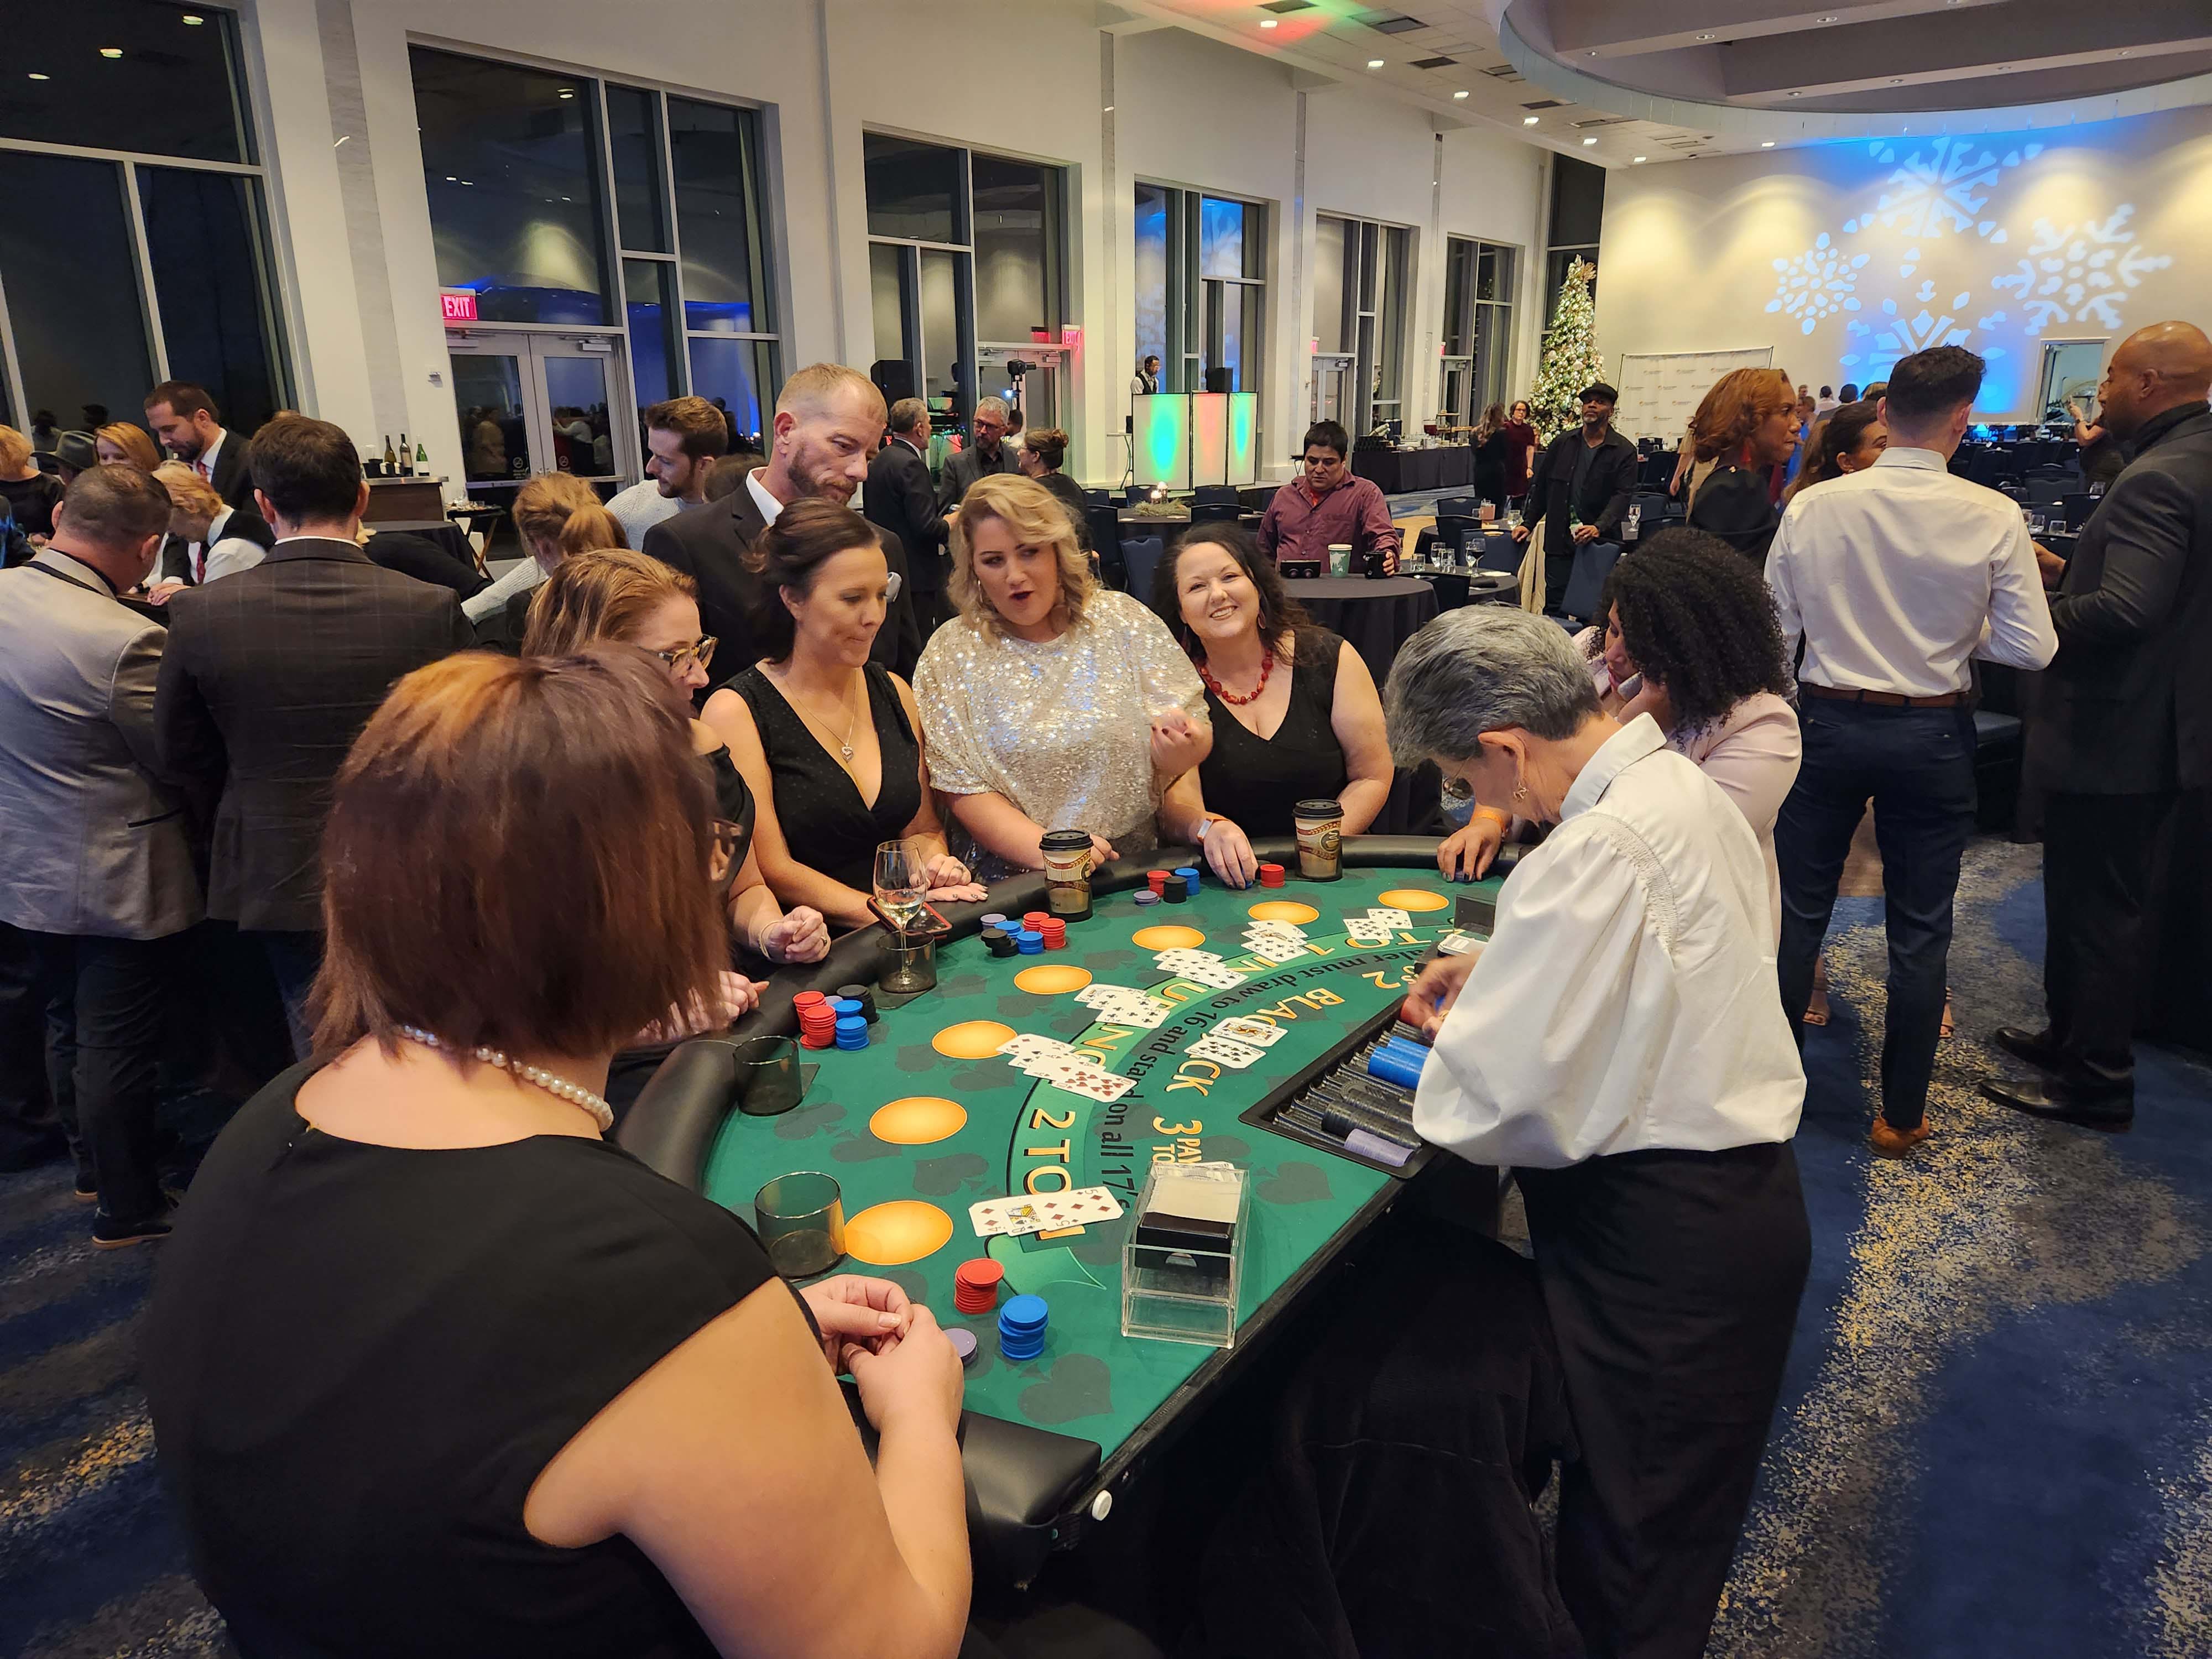 Blackjack table with players and dealers at a Holiday Party